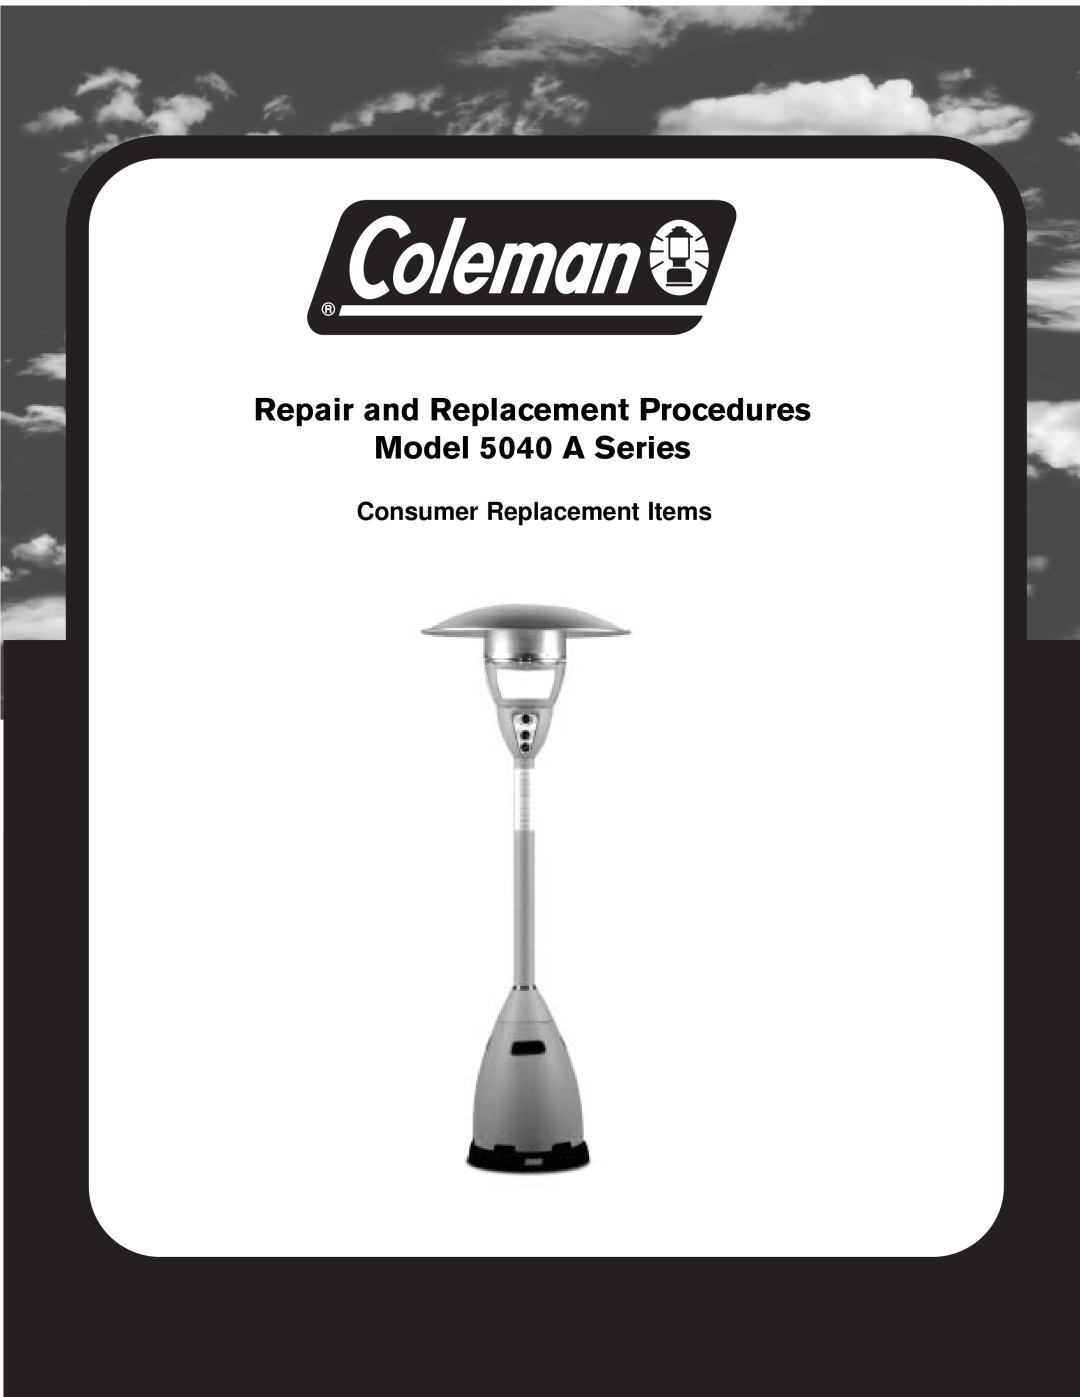 Coleman manual Repair and Replacement Procedures, Model 5040 A Series, Consumer Replacement Items 